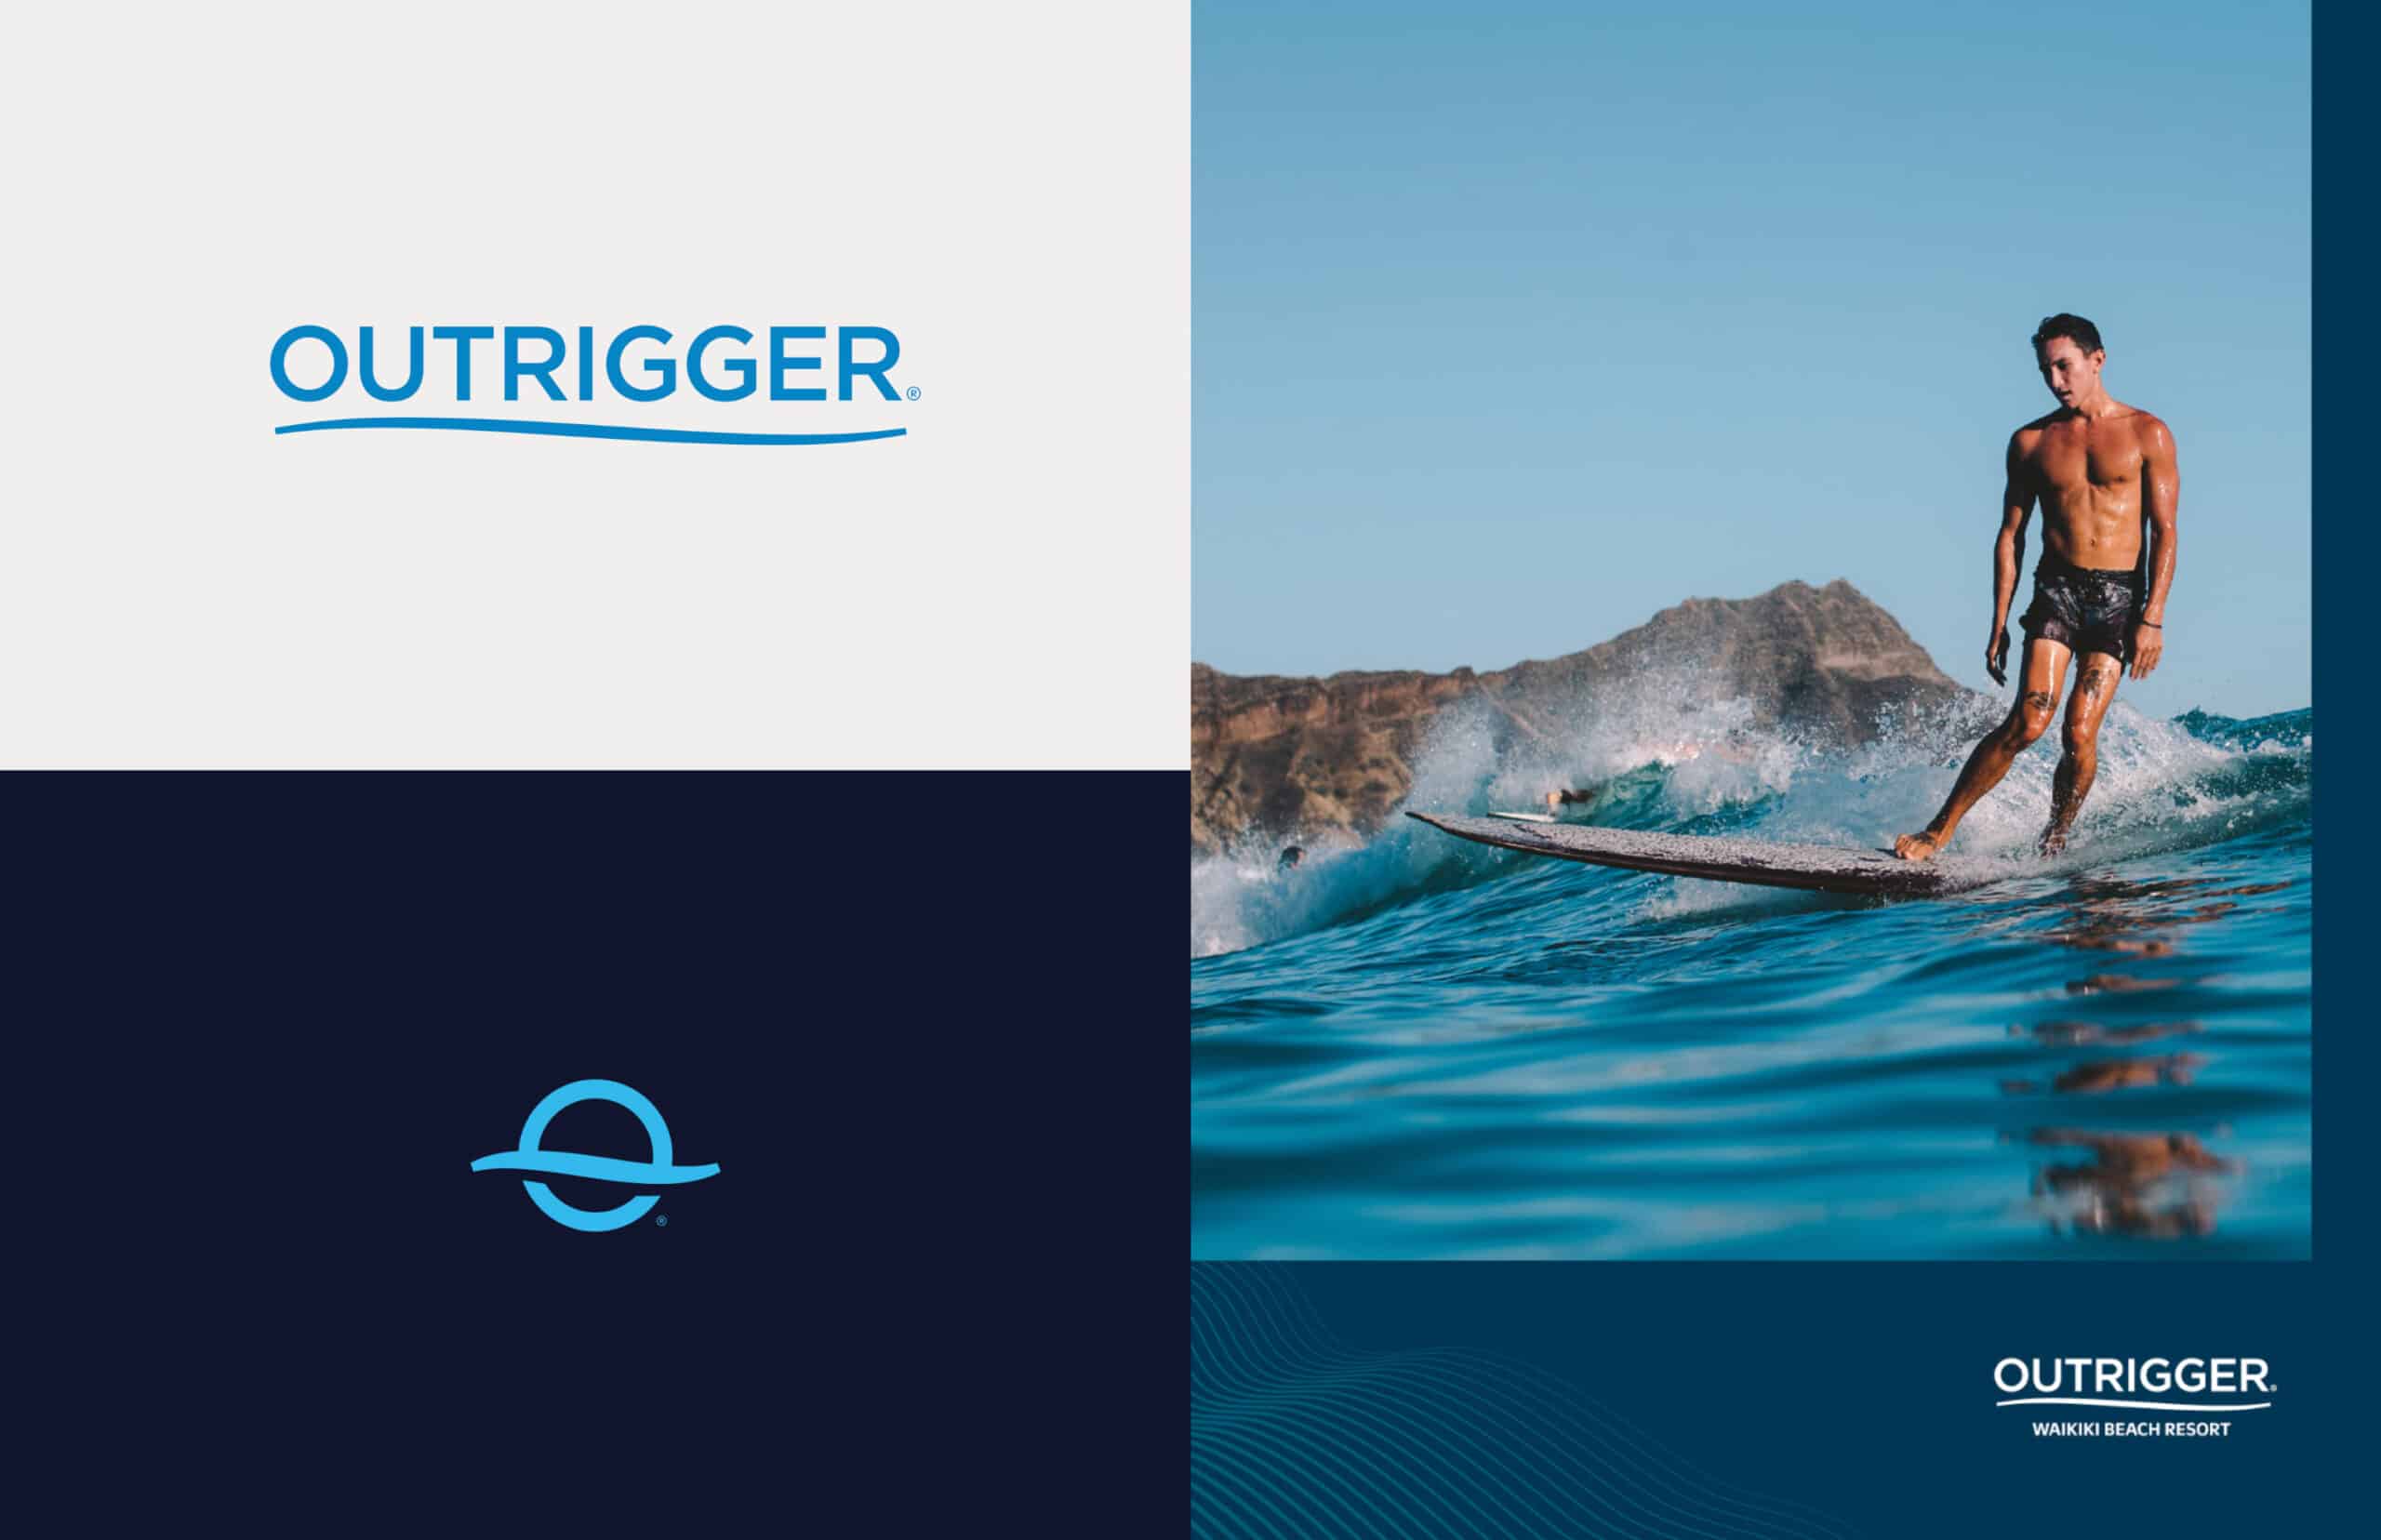 Blue Outrigger logo with off-white background on top left, underneath is a dark blue background with the Outrigger O icon in light blue; on the right is a brochure layout with Outrigger Waikiki Resort in bottom right corner on dark blue background with light blue waves. Main image is a male surfer in board shorts with the mountain head in background.